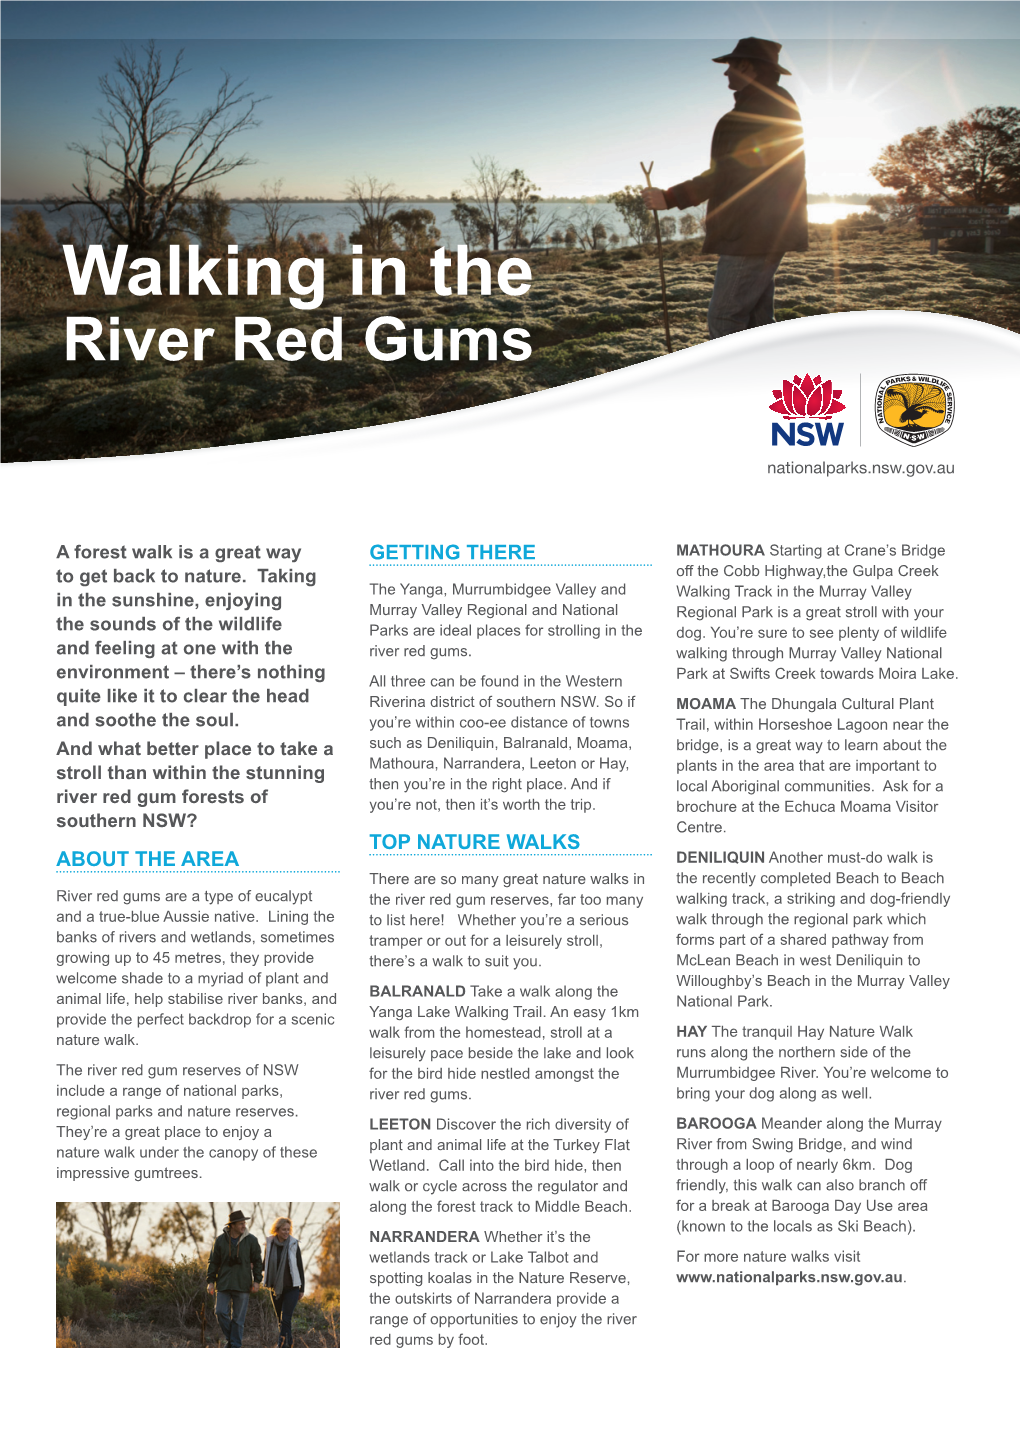 Walking in the River Red Gums